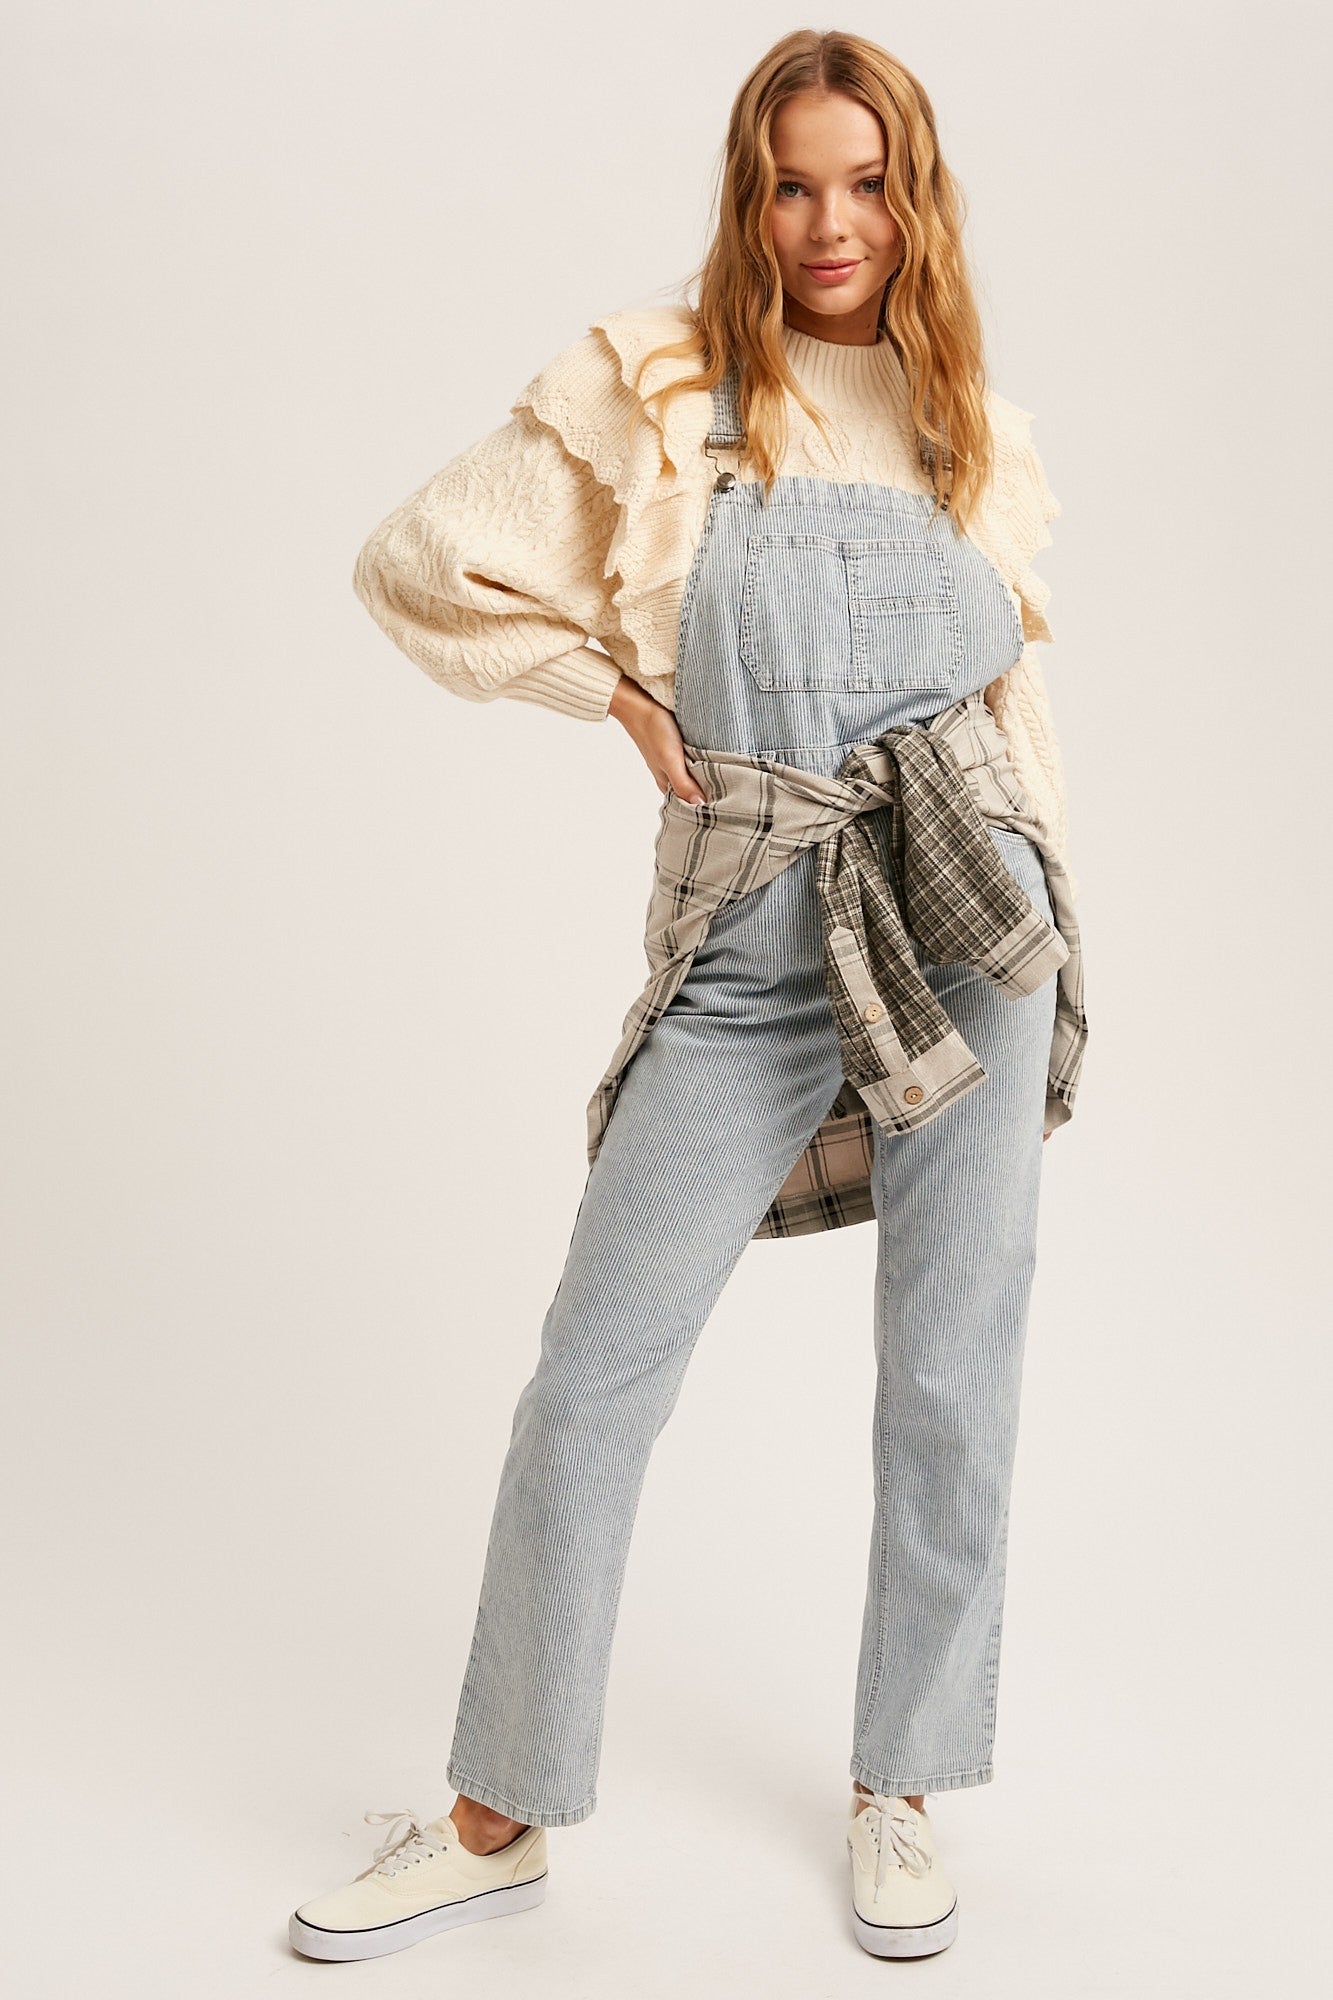 EVERYDAY VIBES SOFT STRETCHED DENIM OVERALLS